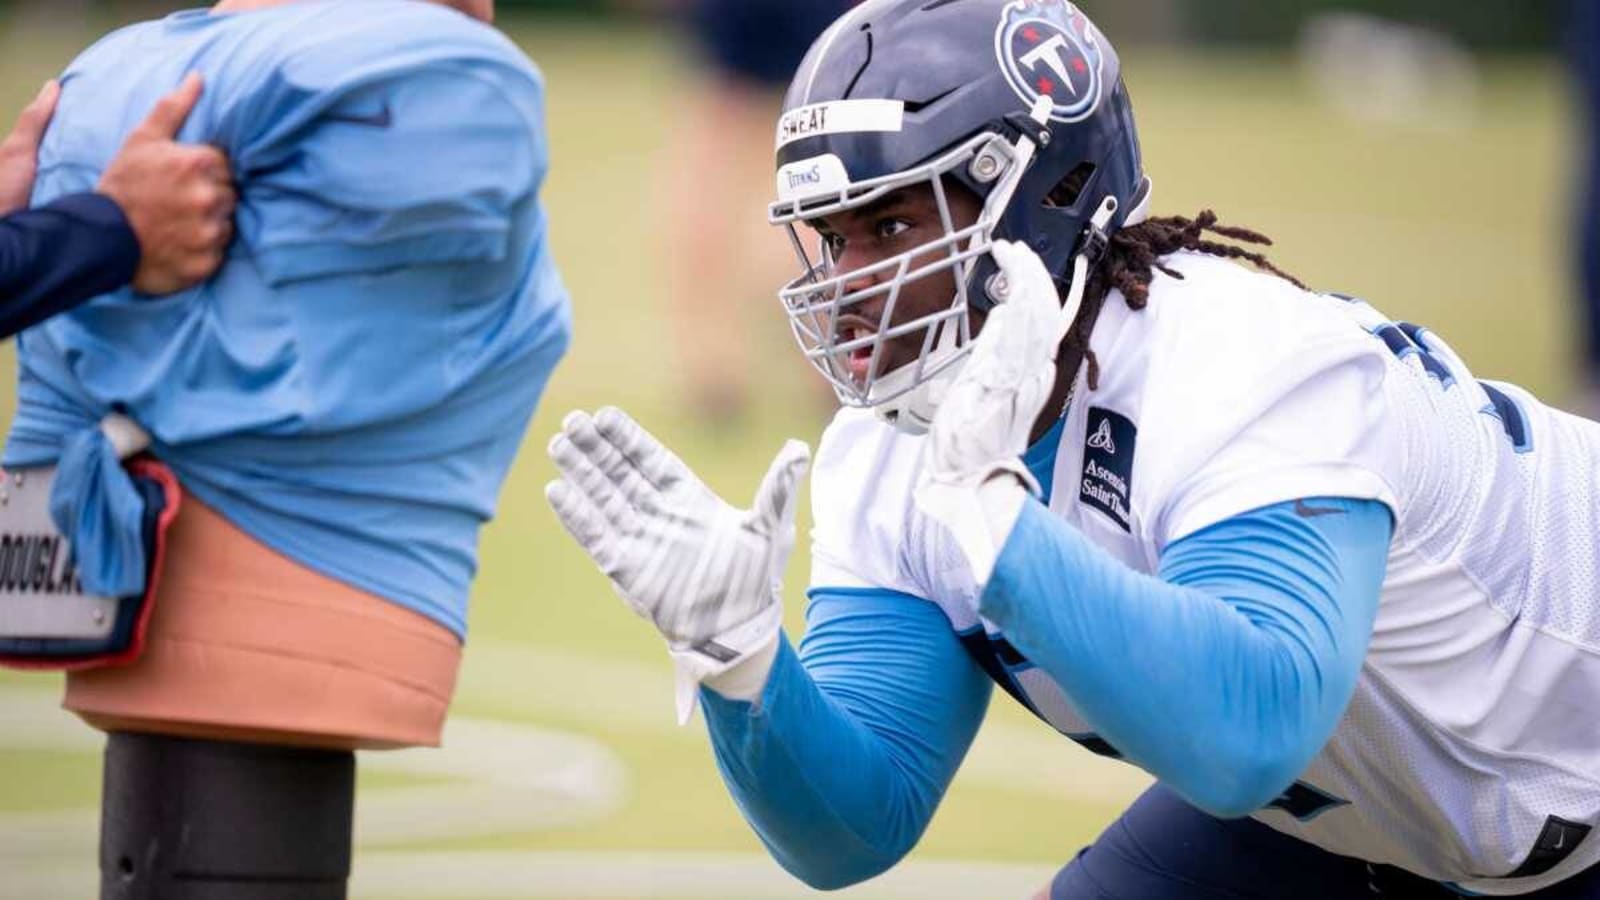 5 takeaways from the first day of Titans rookie minicamp